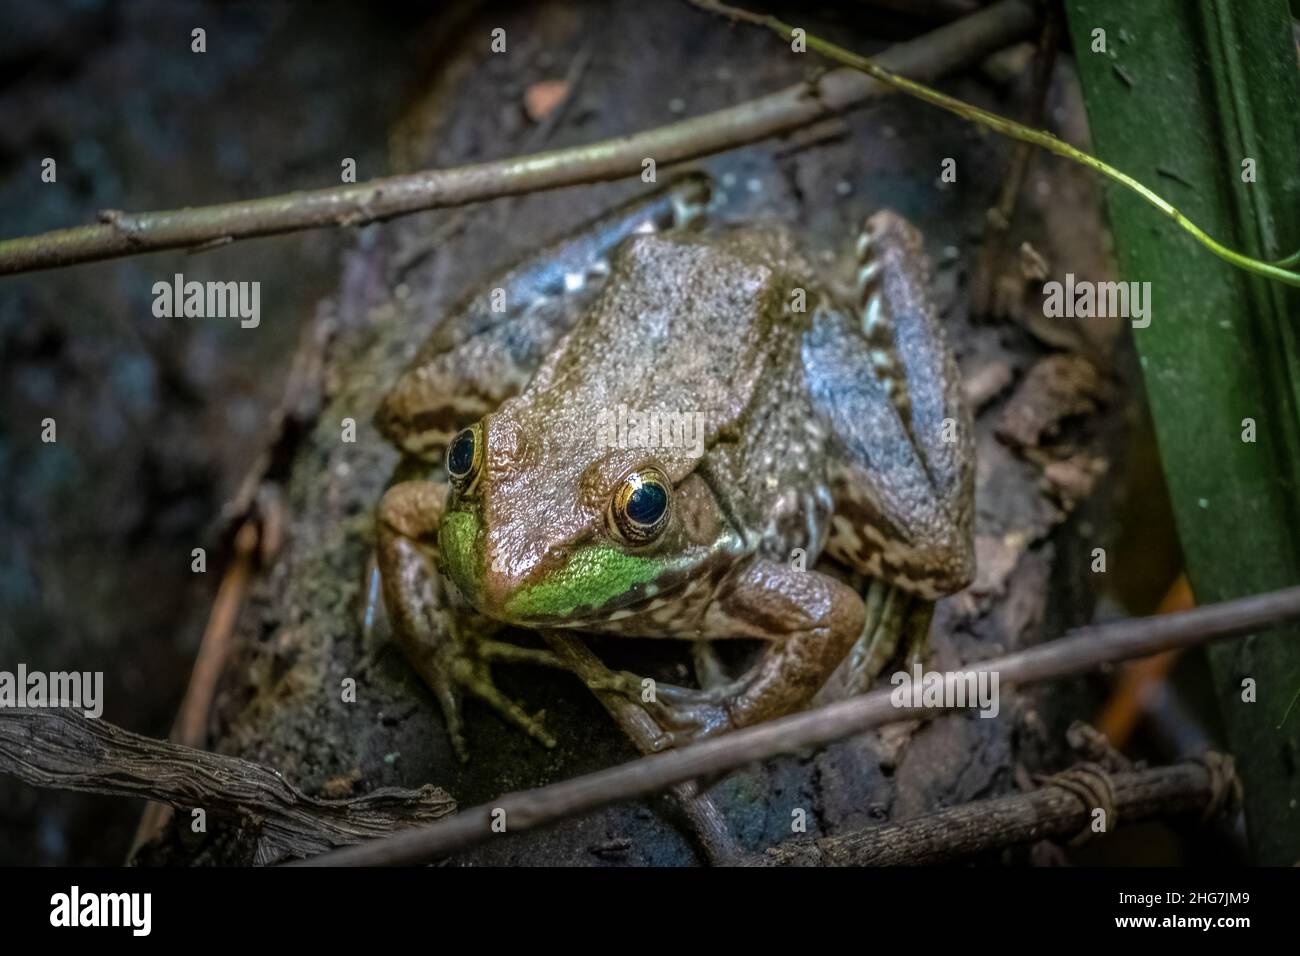 A Green Frog (Lithobates clamitans) rests on a log in the swamp. Raleigh, North Carolina. Stock Photo